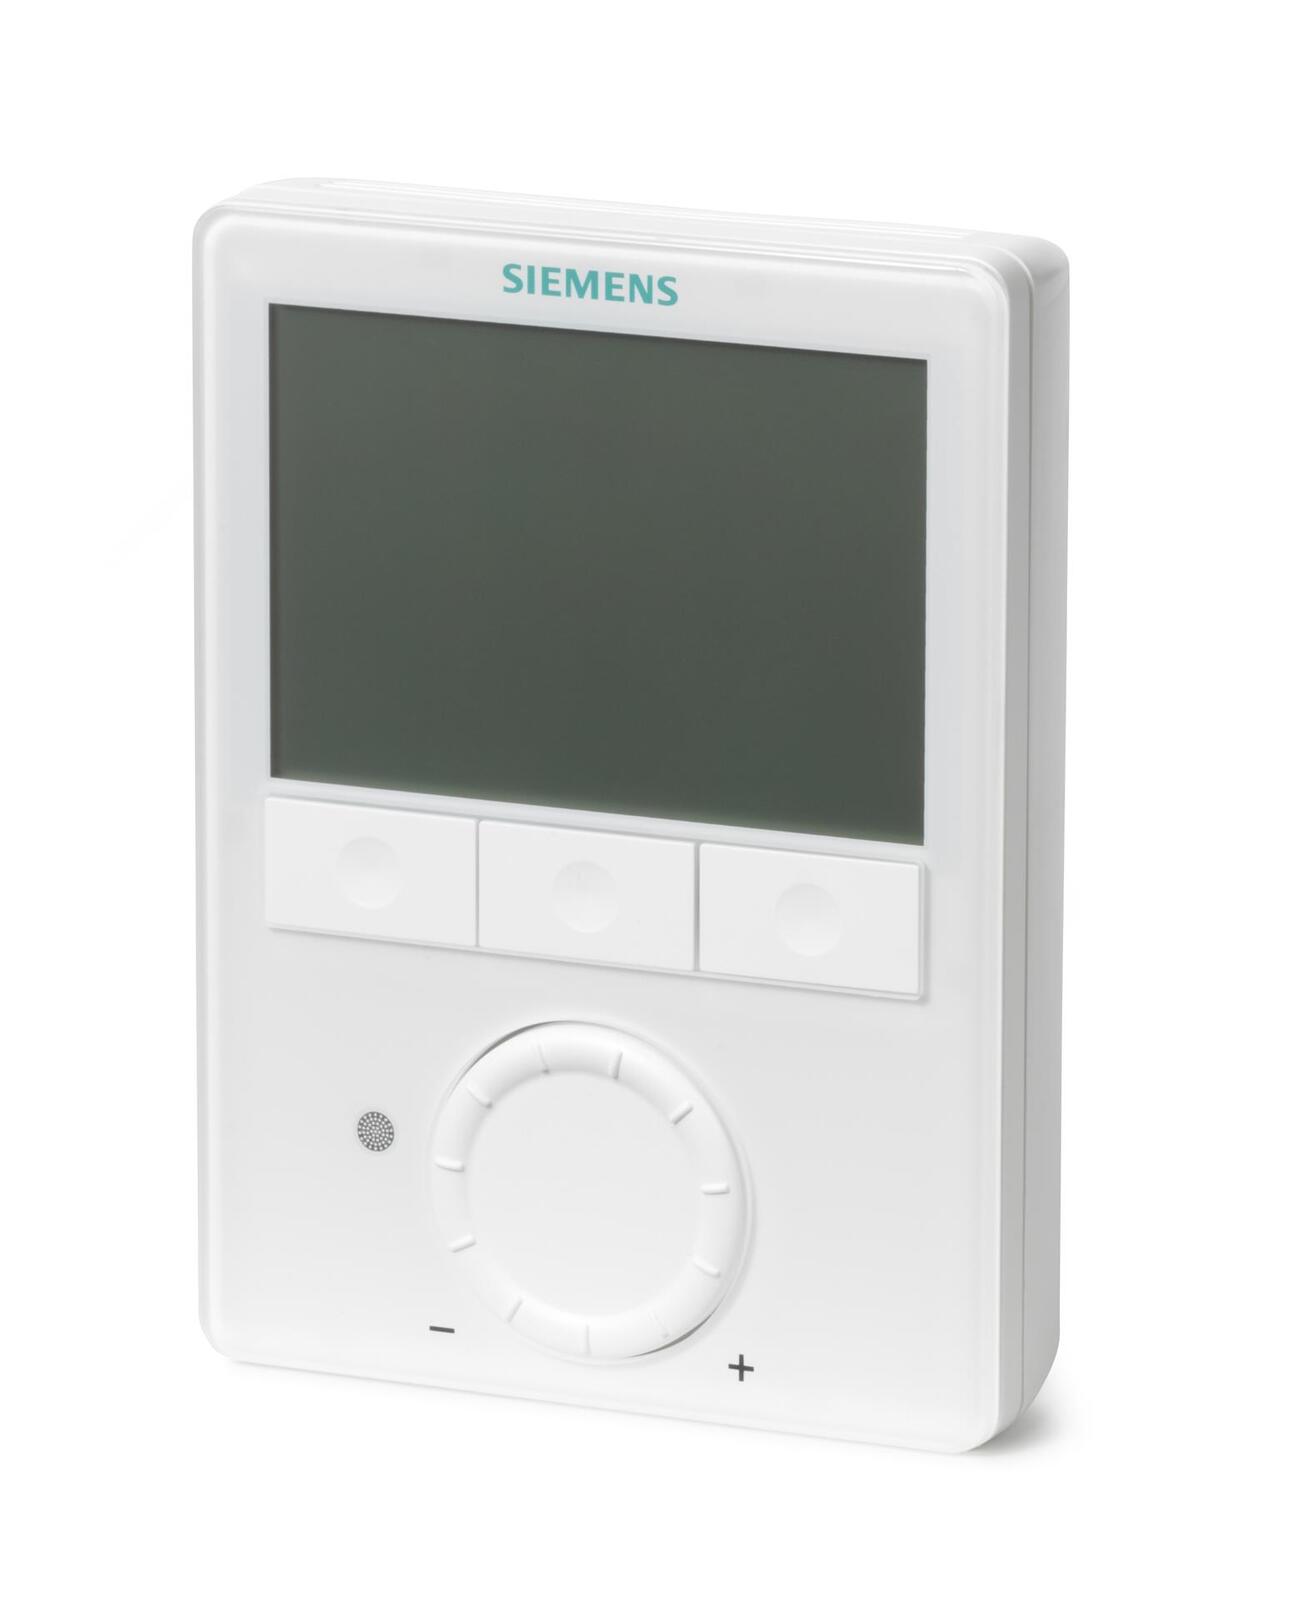 Siemens Room Controller, LCD, H/C, AC 24V, Auto/Man.C/Over, 3 Speed or ECM fan, 0-10V Output, with 7-Day Timeswitch